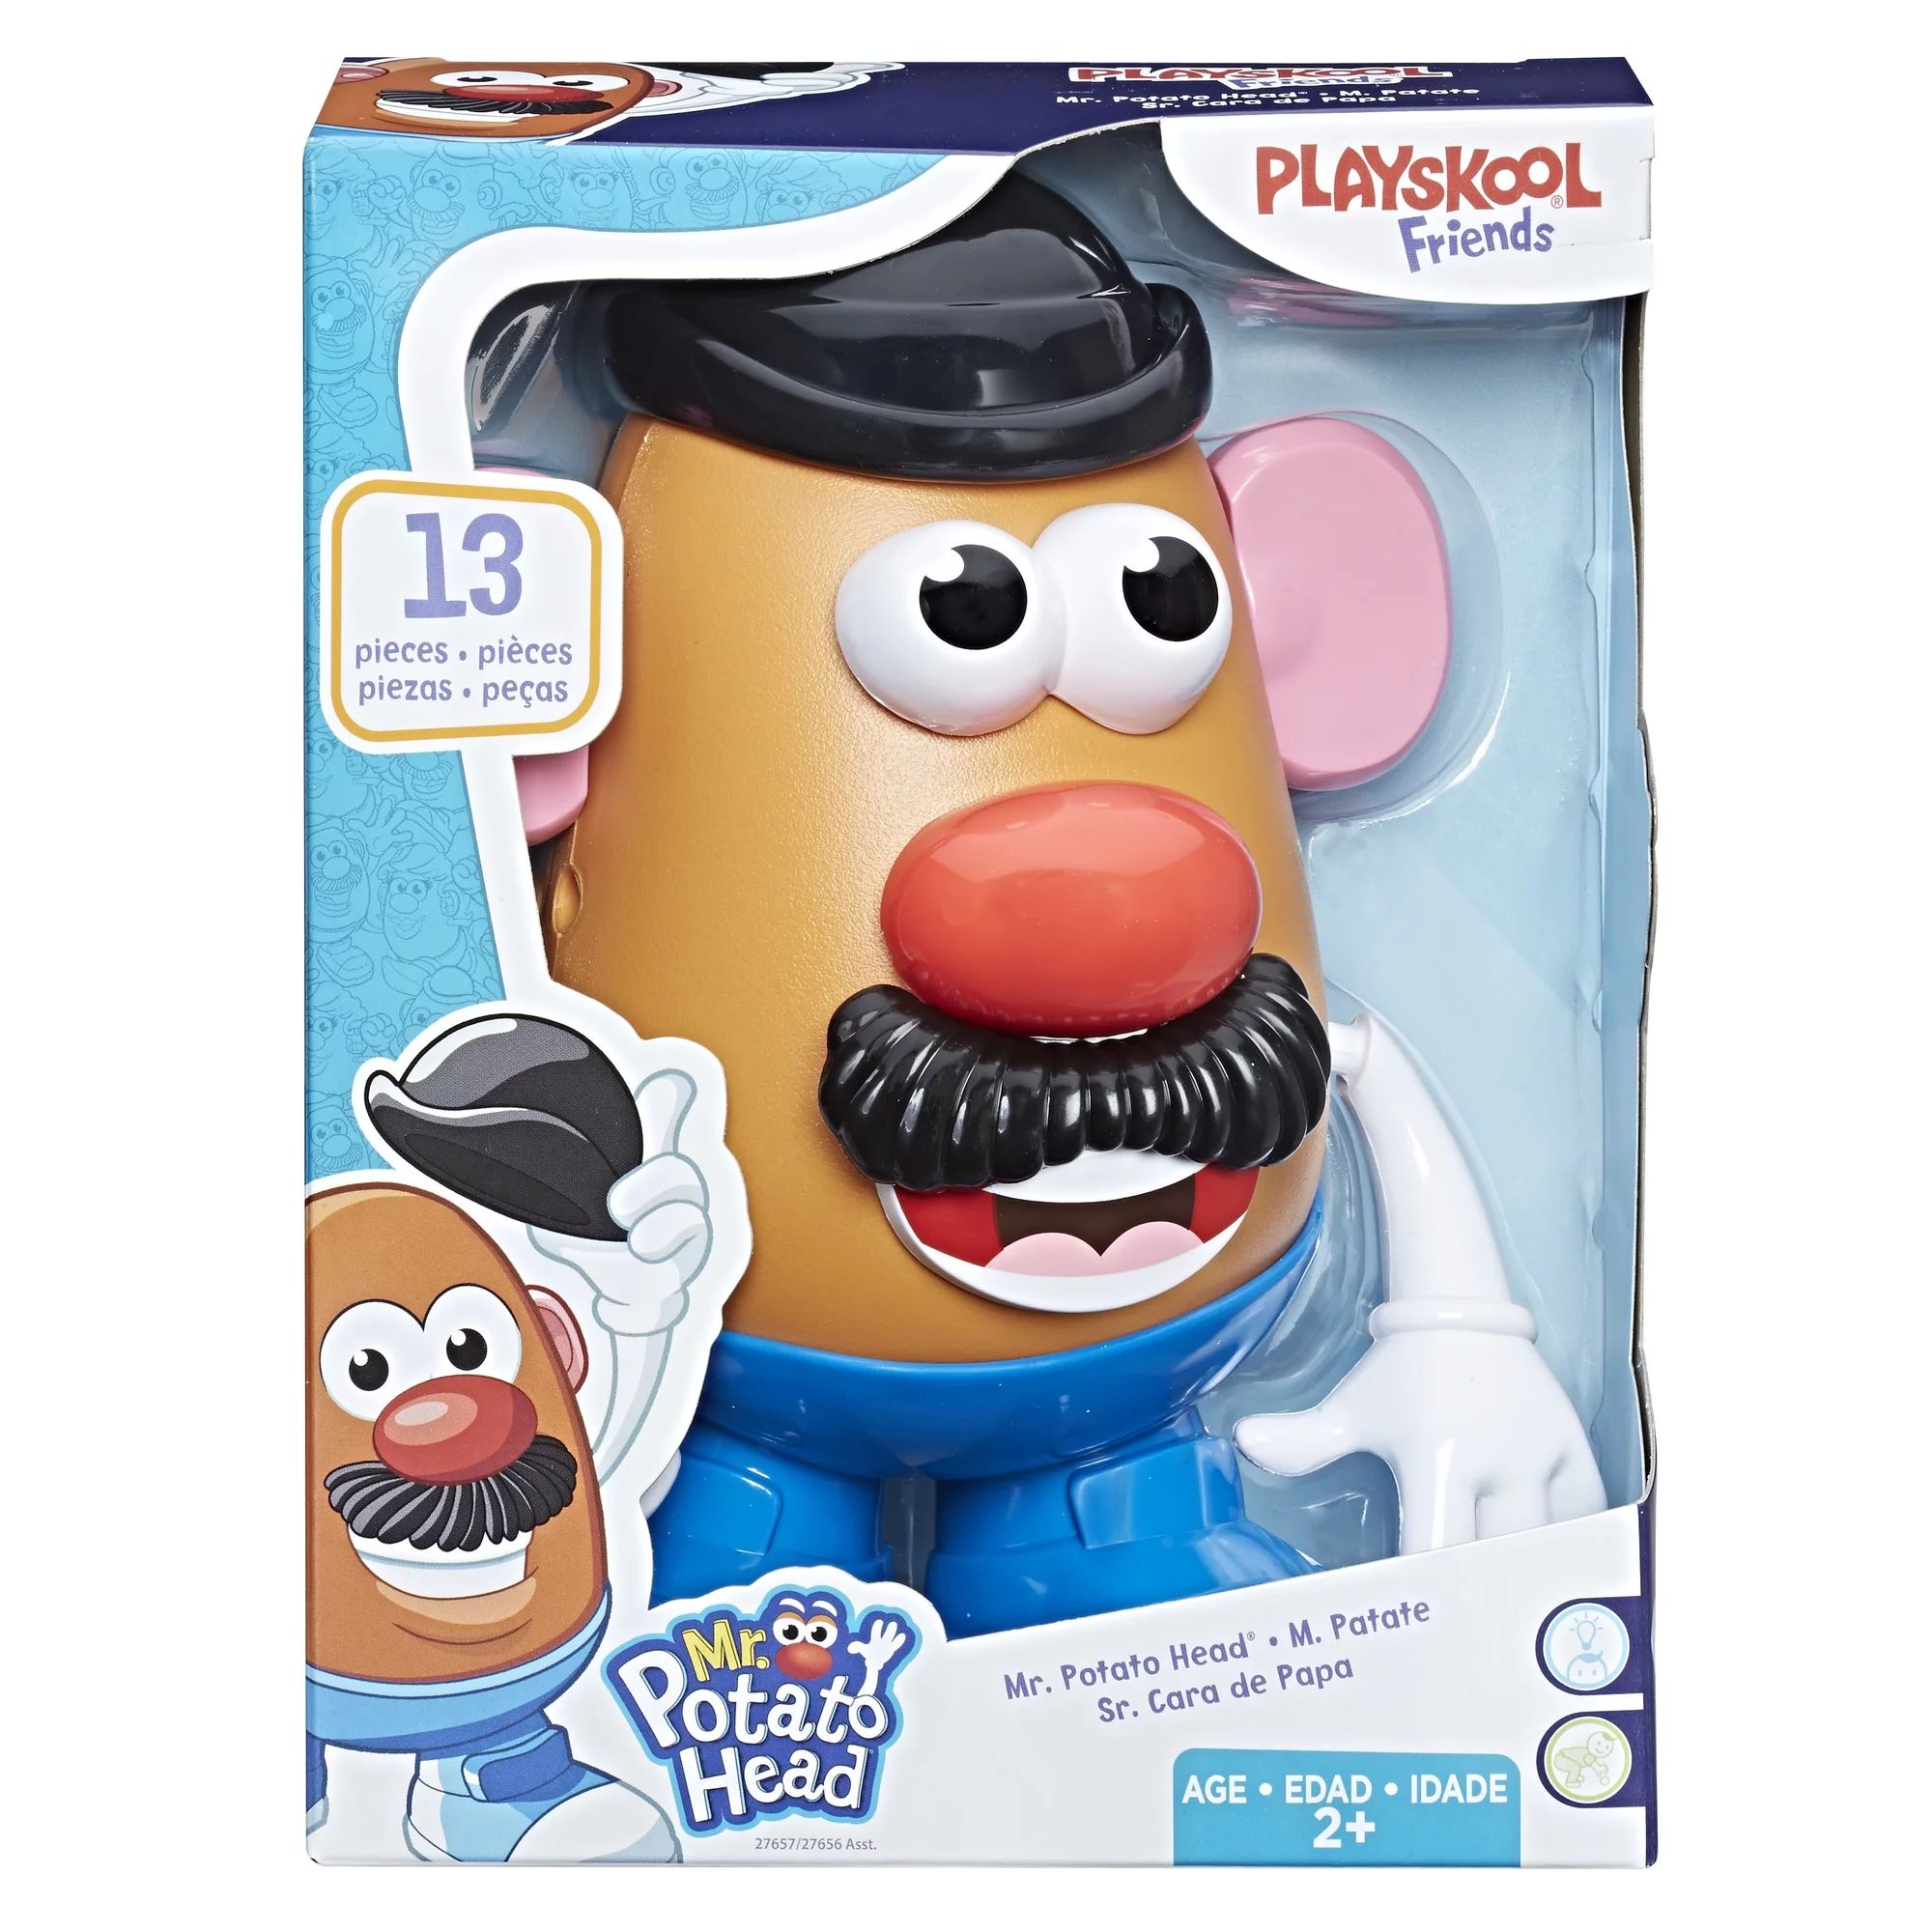 Playskool Friends Mr. Potato Head Classic Toy for Ages 2 and up, Includes 11 Accessories - Walmar... | Walmart (US)